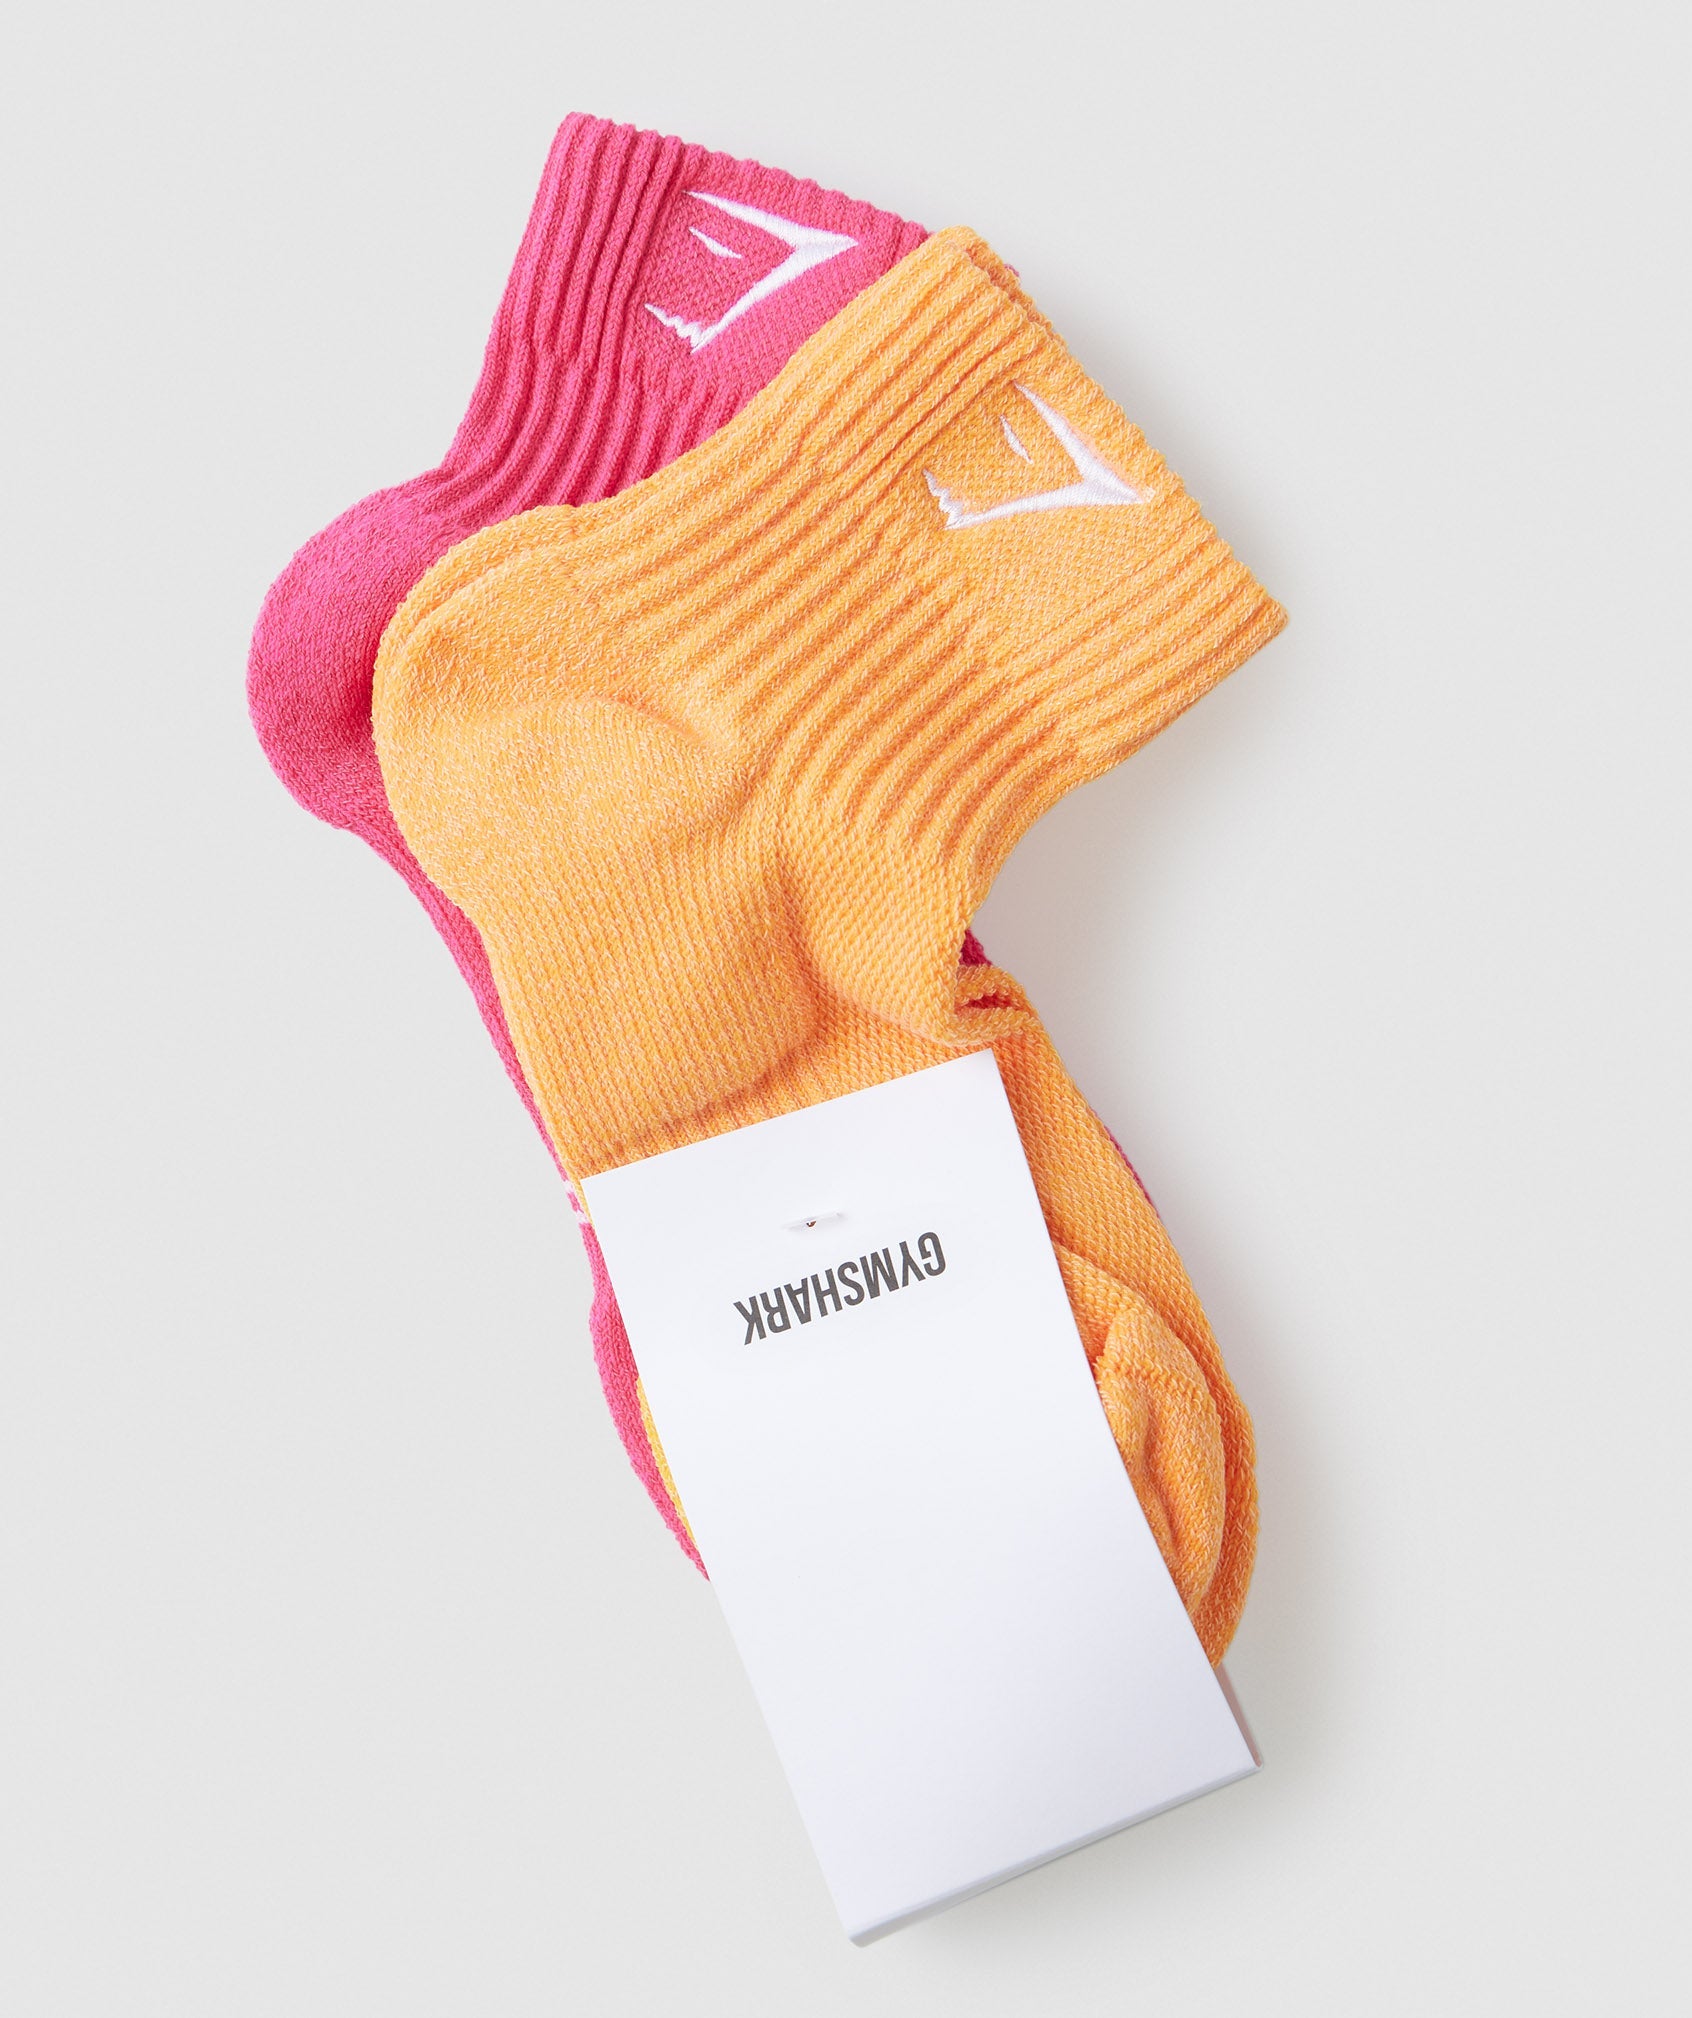 Sharkhead Embroidered Quarter Socks 2pk in Hibiscus Pink/Apricot Orange - view 2